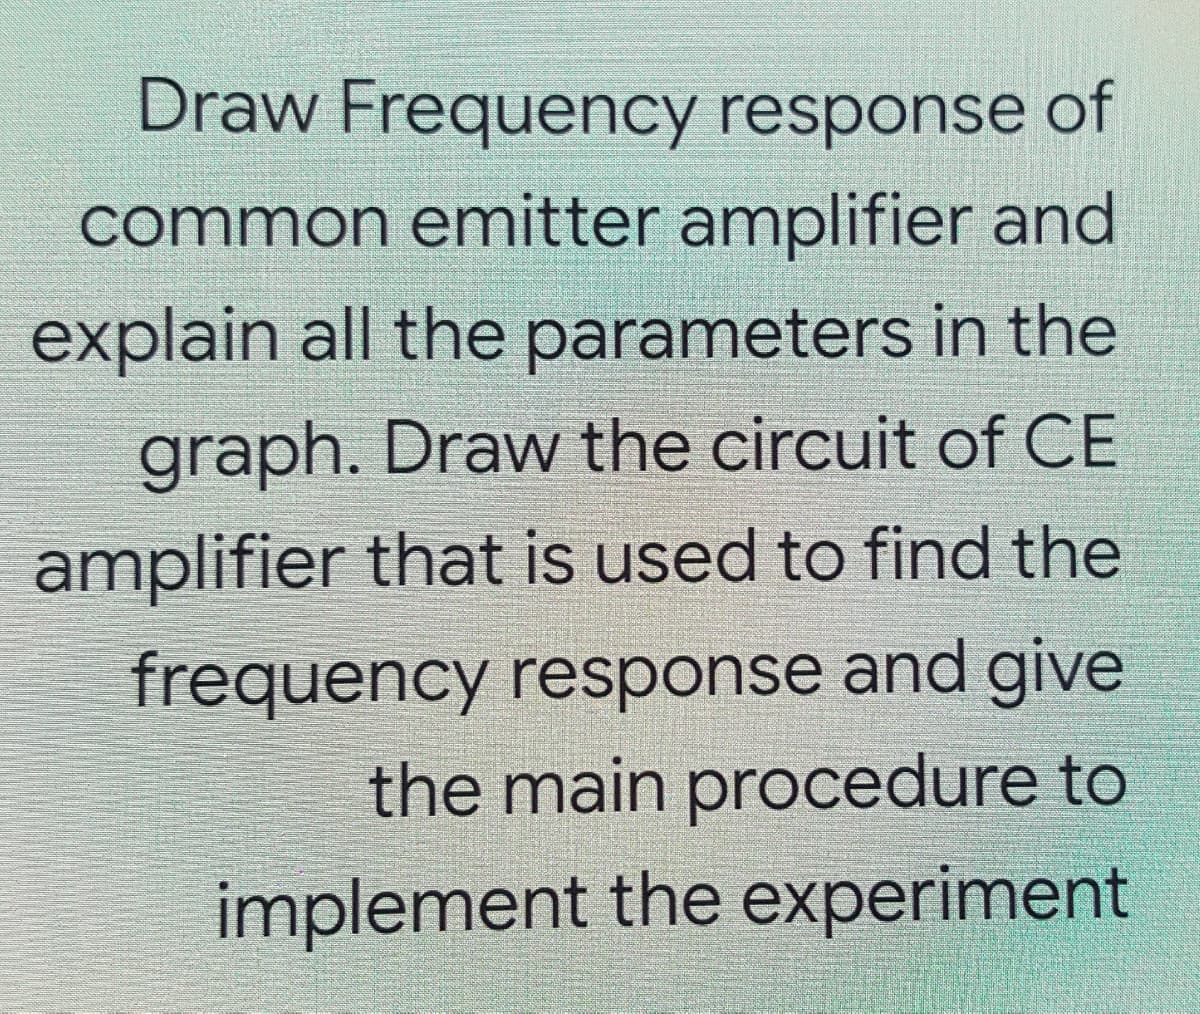 Draw Frequency response of
common emitter amplifier and
explain all the parameters in the
graph. Draw the circuit of CE
amplifier that is used to find the
frequency response and give
the main procedure to
implement the experiment
